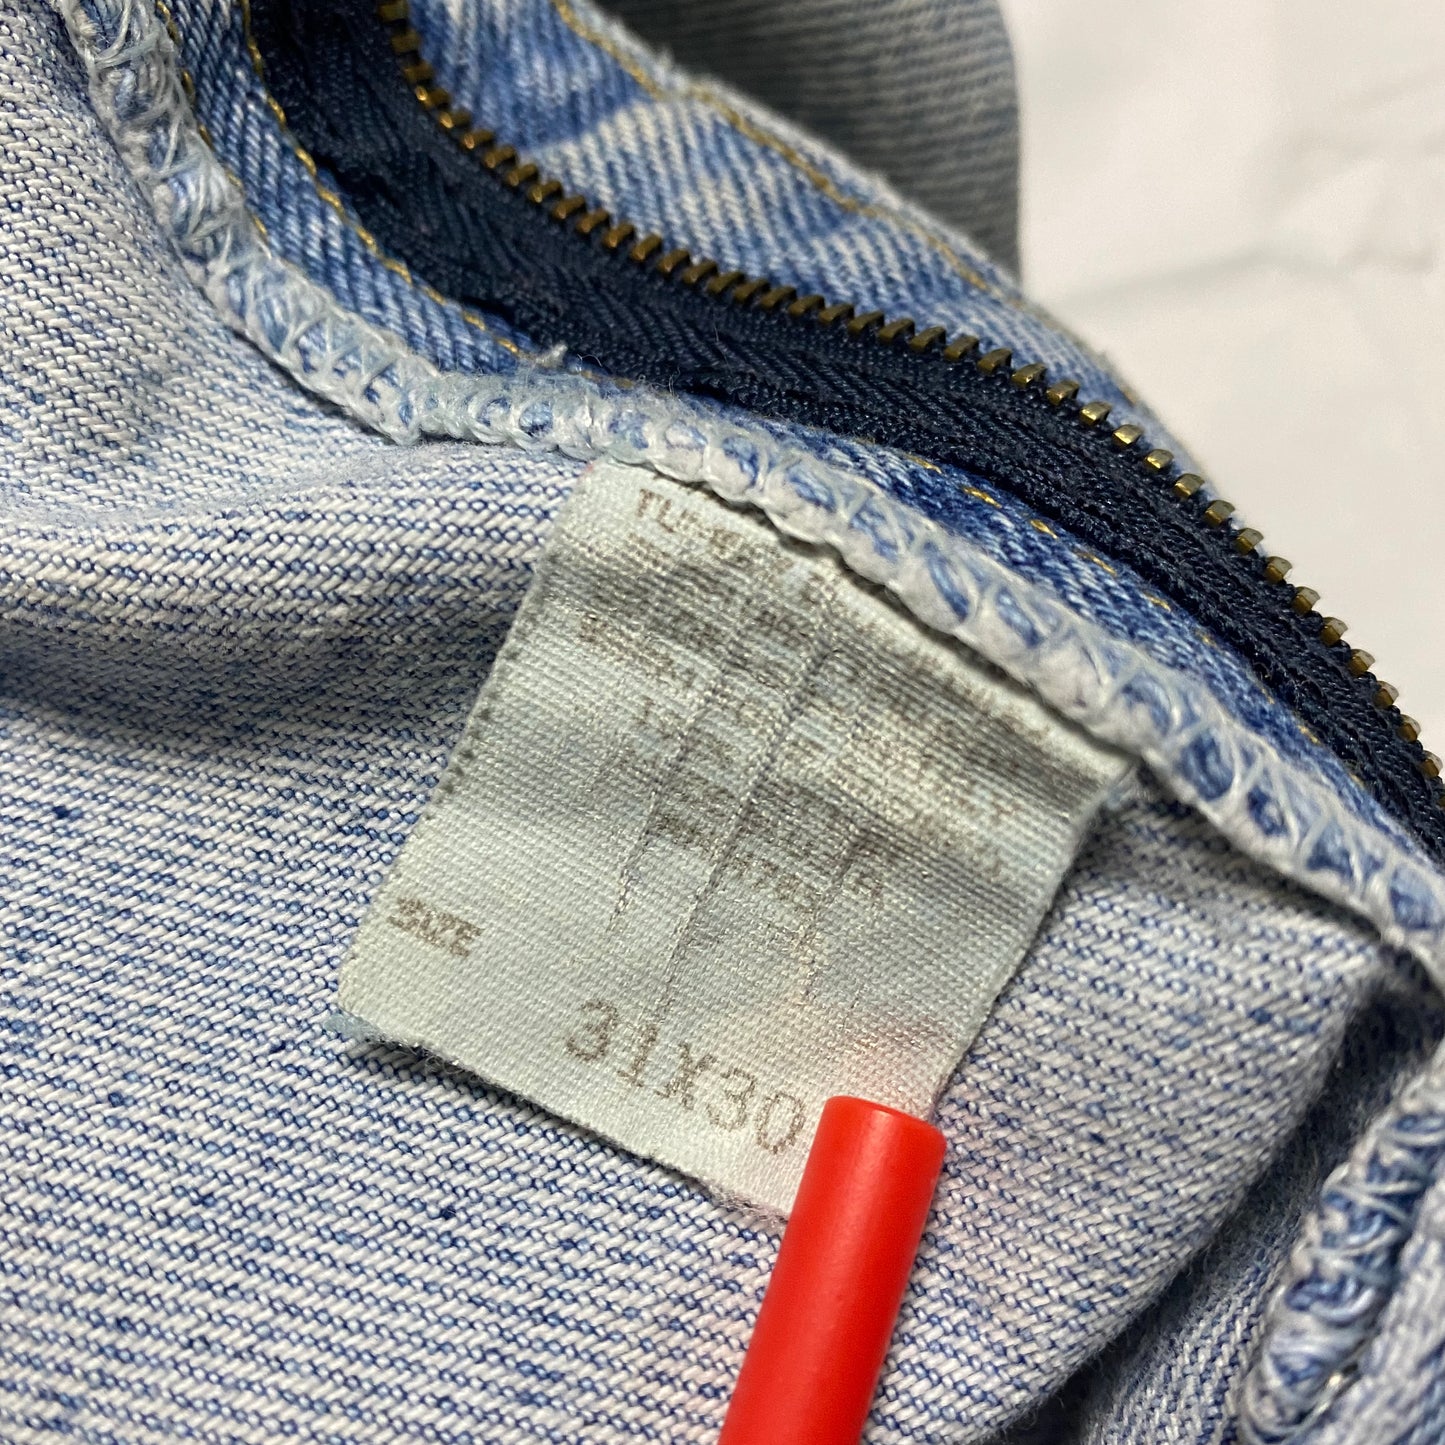 90's LEE JEANS "MADE IN USA"